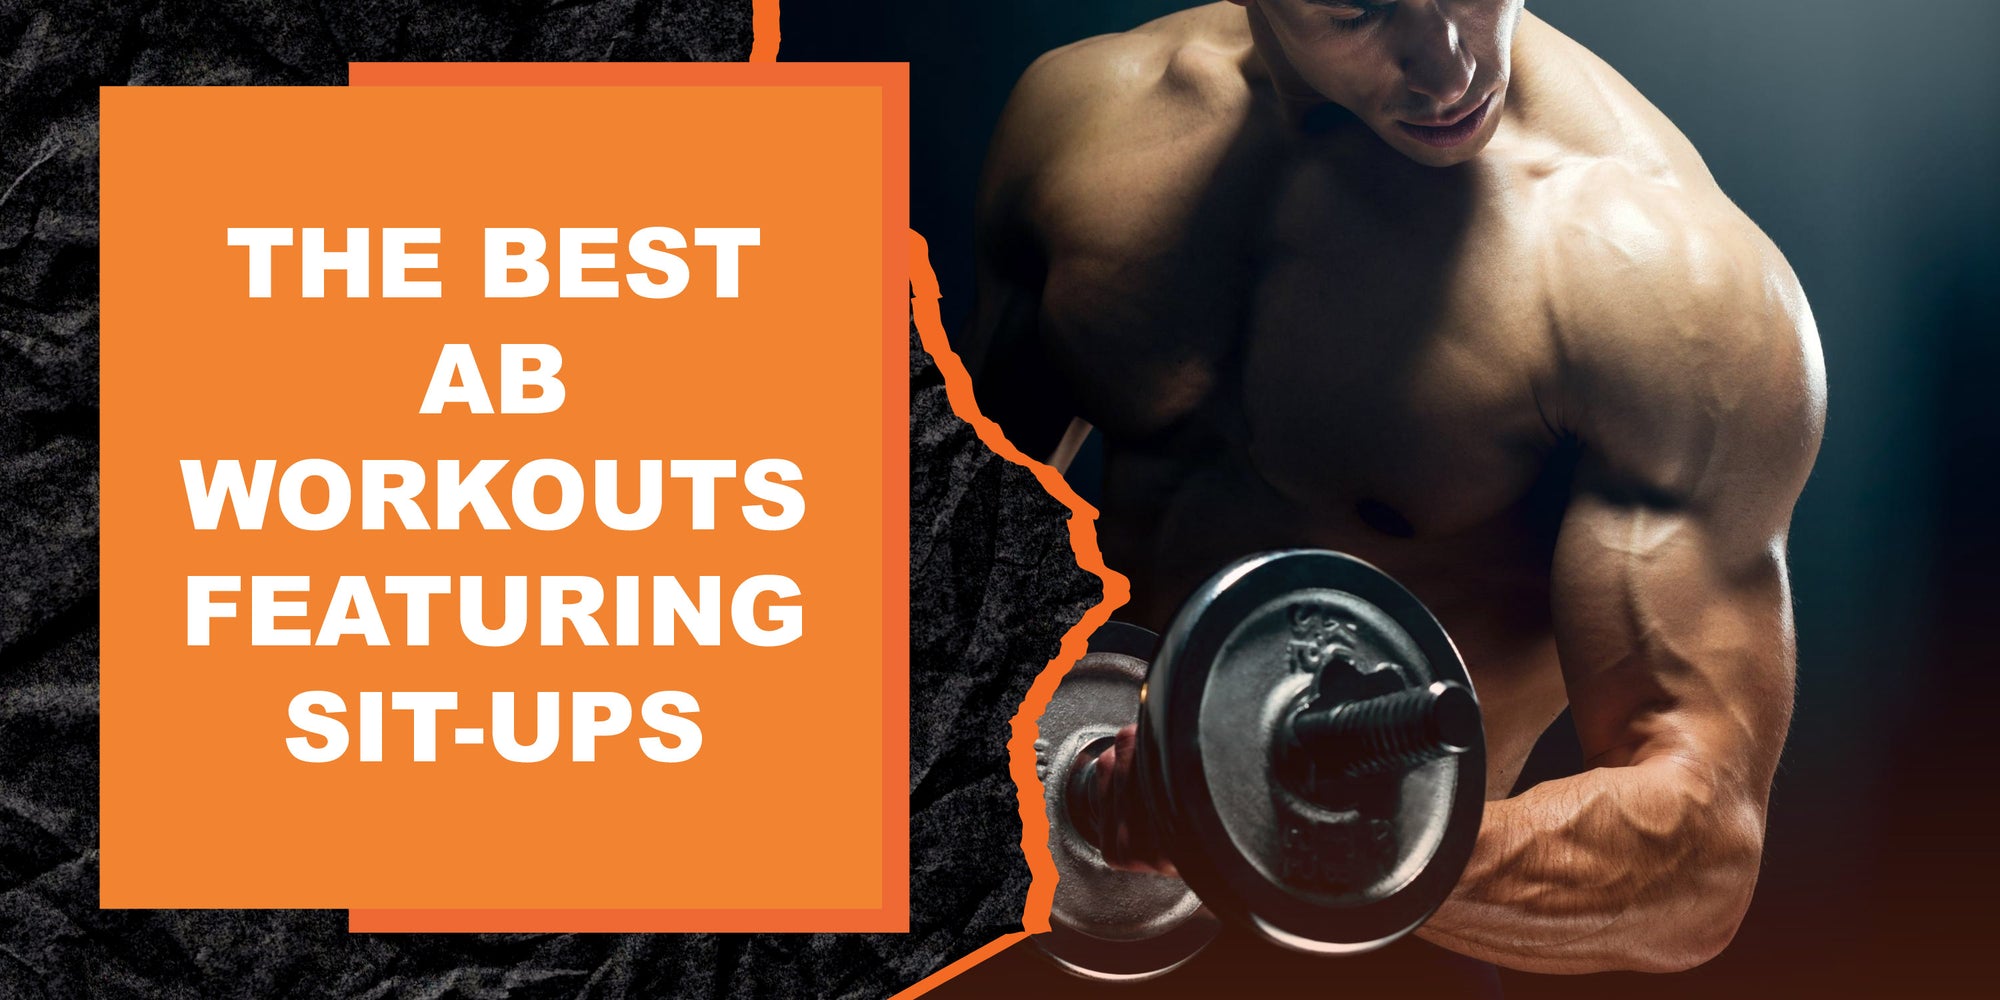 The Best Ab Workouts Featuring Sit-Ups